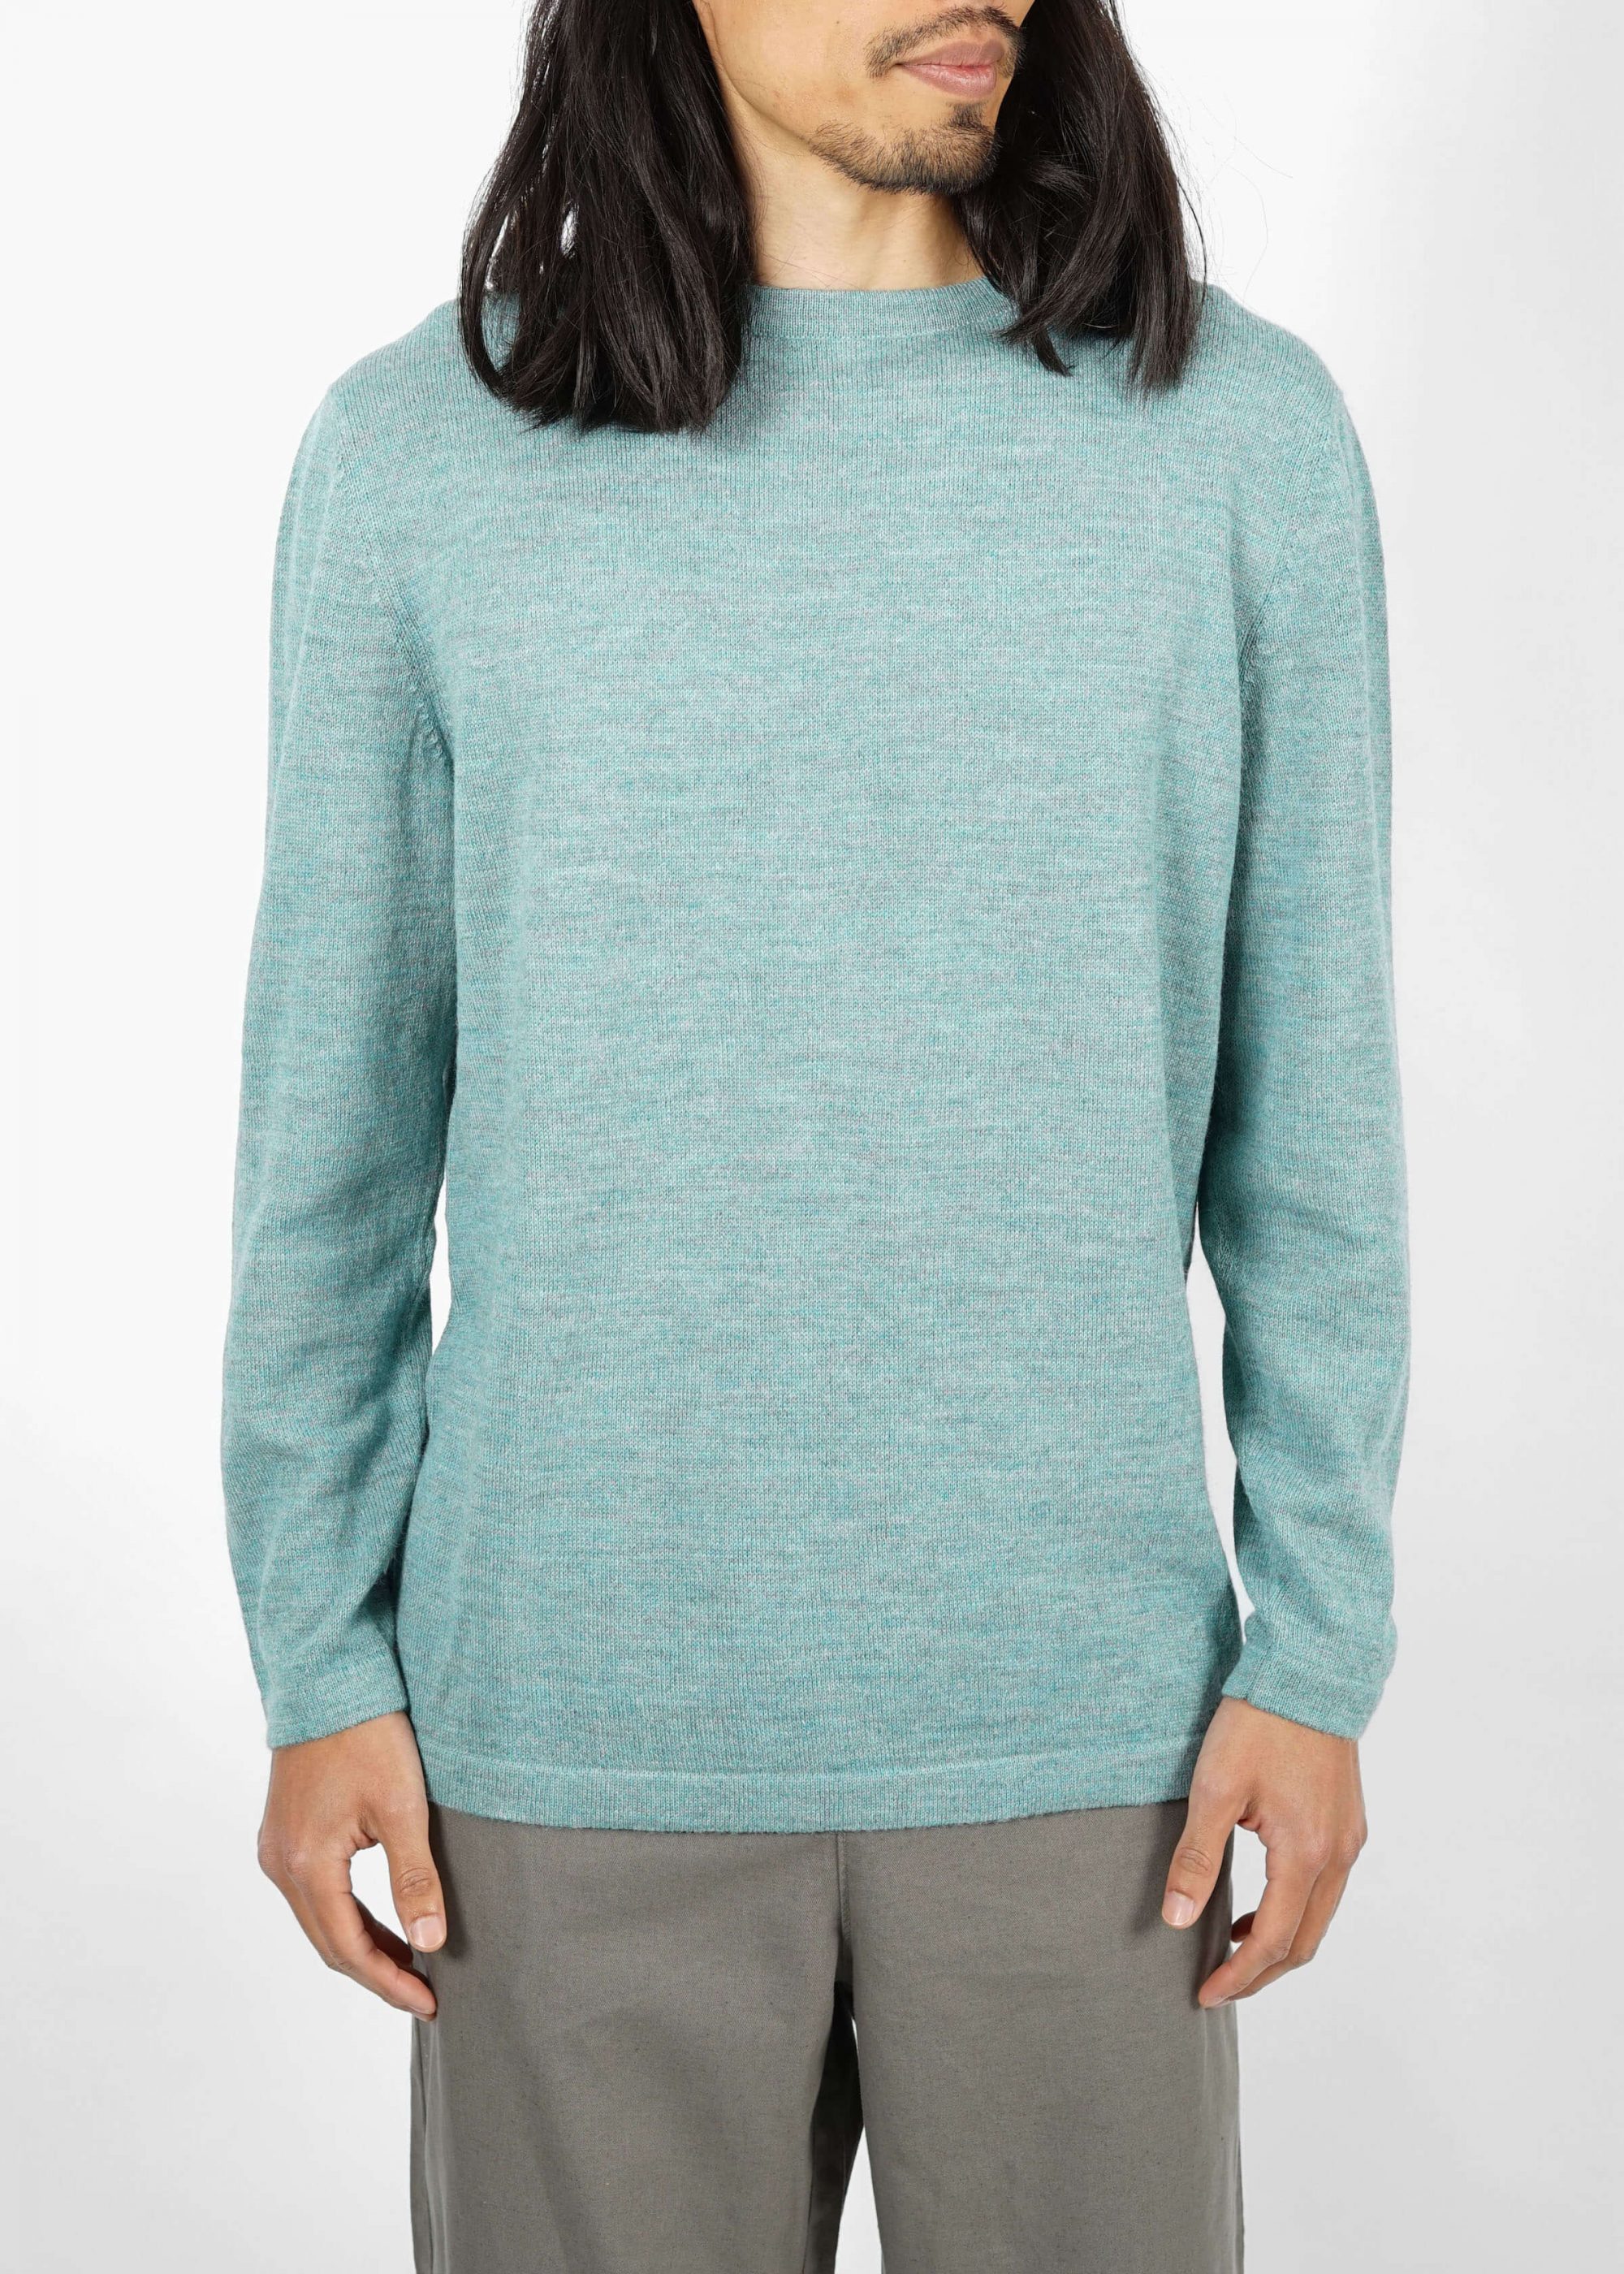 Product image for »Aqua« Light-Weight Sweater Baby Alpaca | Turquoise